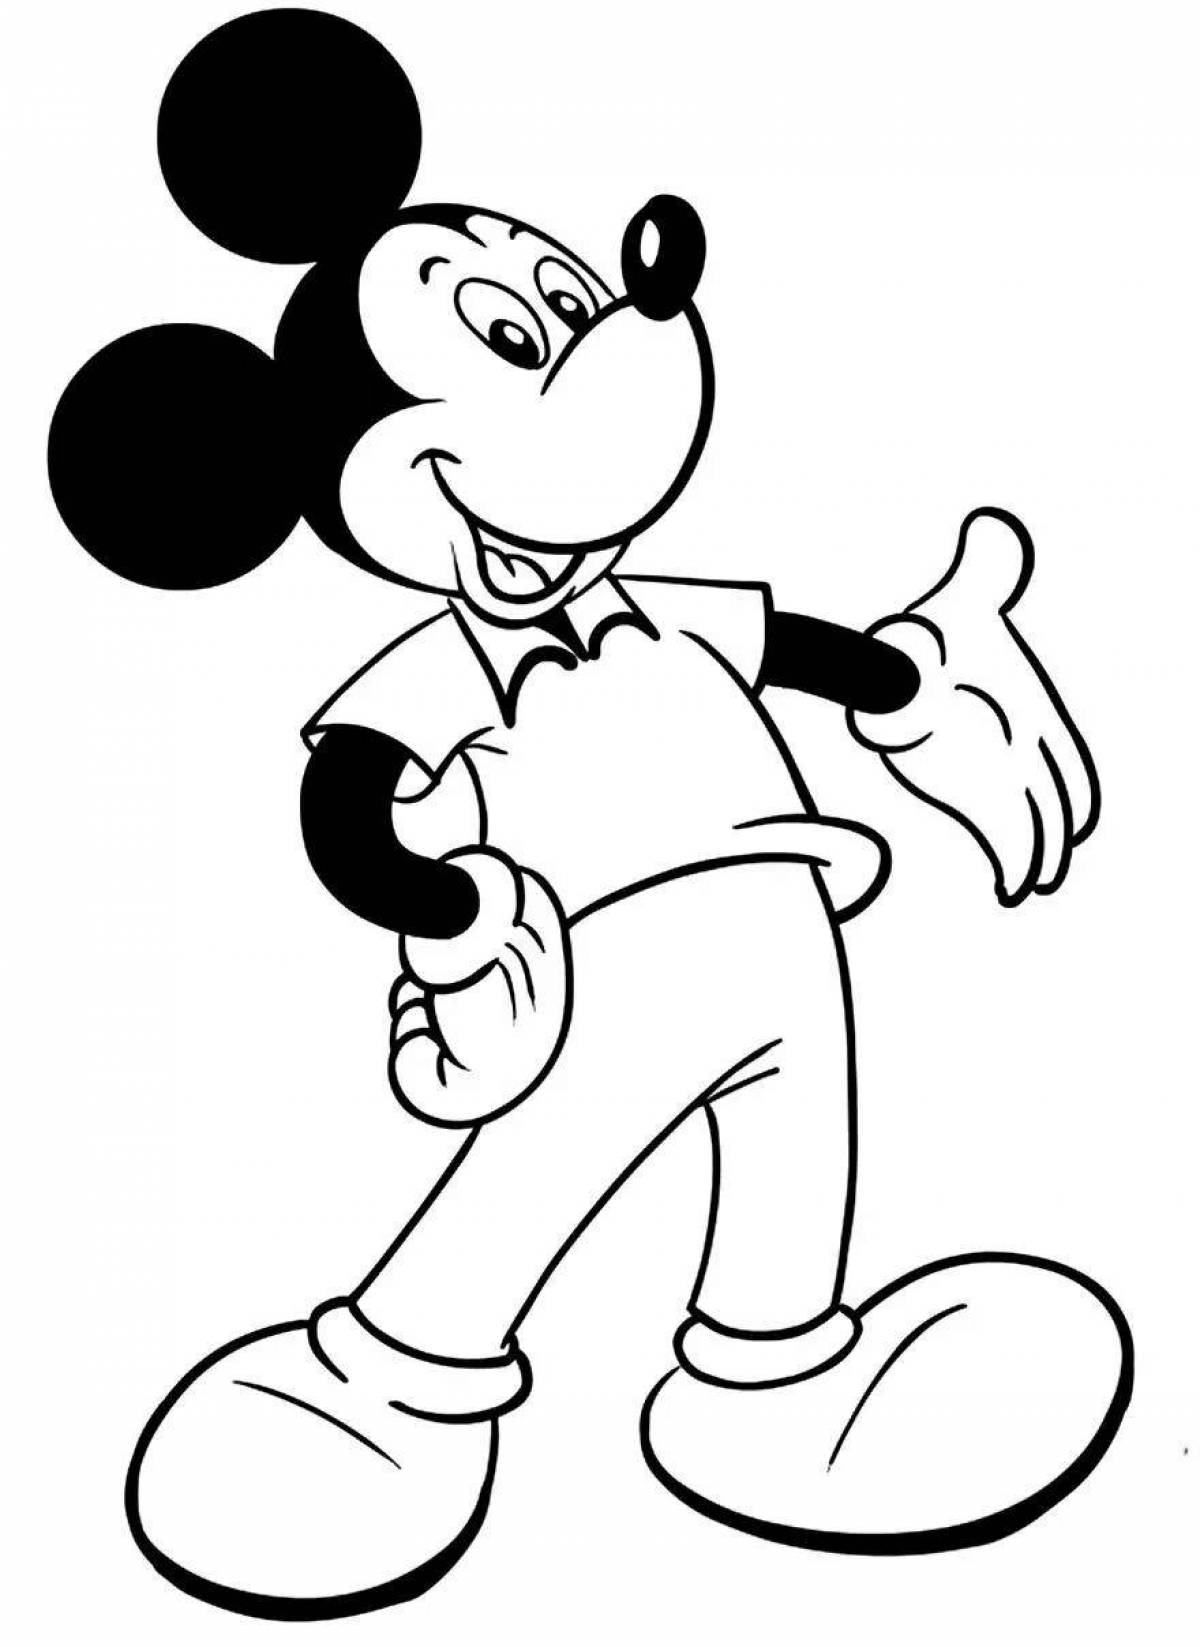 Mickey mouse creative coloring for boys